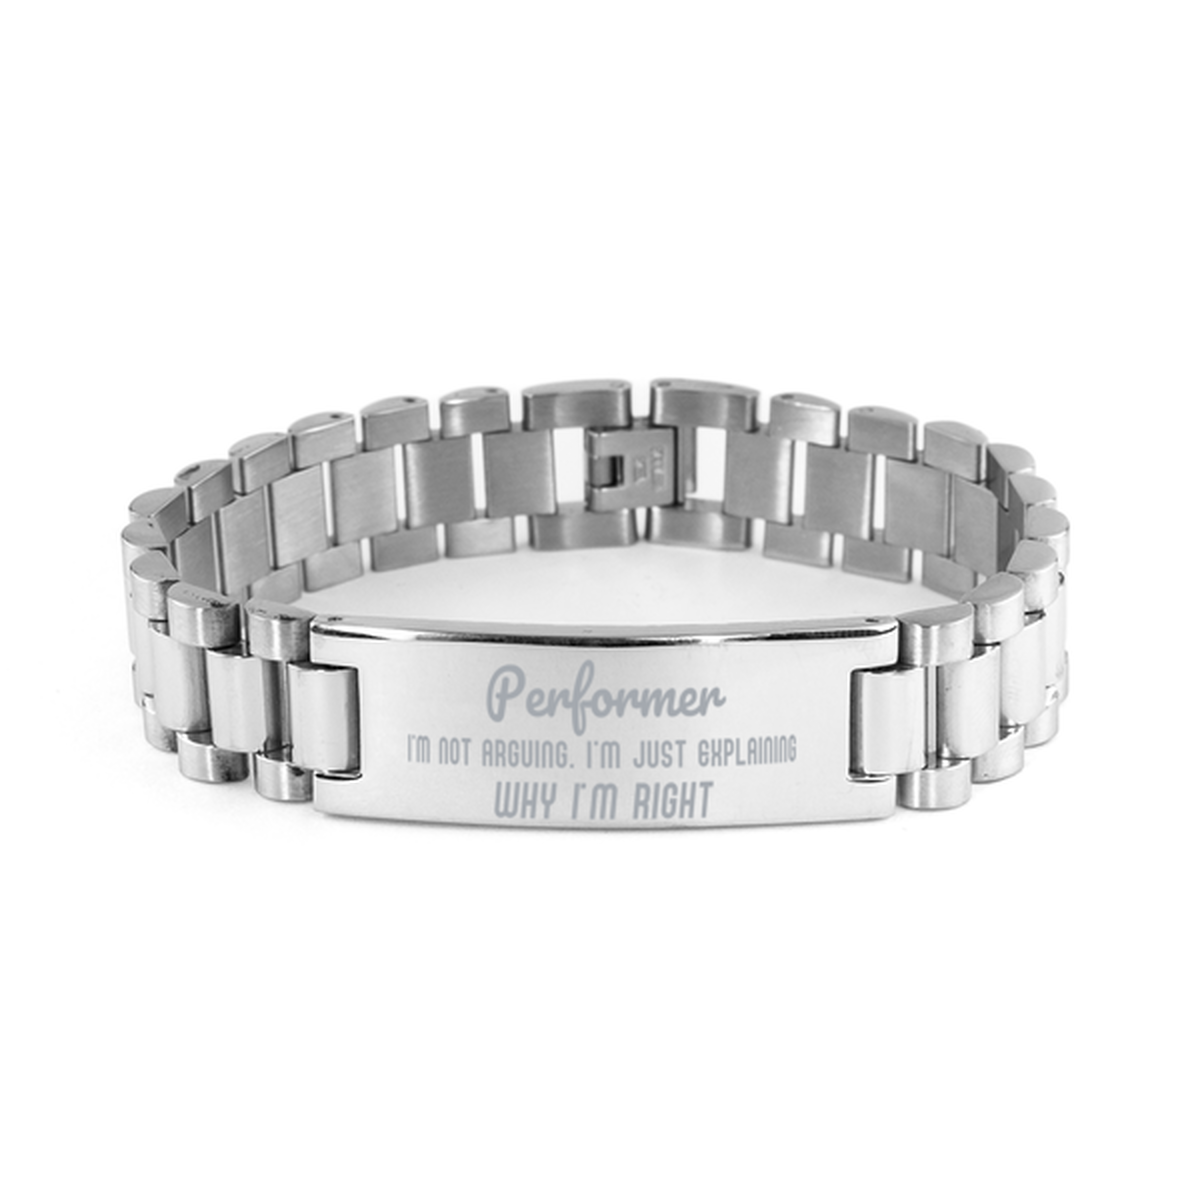 Performer I'm not Arguing. I'm Just Explaining Why I'm RIGHT Ladder Stainless Steel Bracelet, Graduation Birthday Christmas Performer Gifts For Performer Funny Saying Quote Present for Men Women Coworker